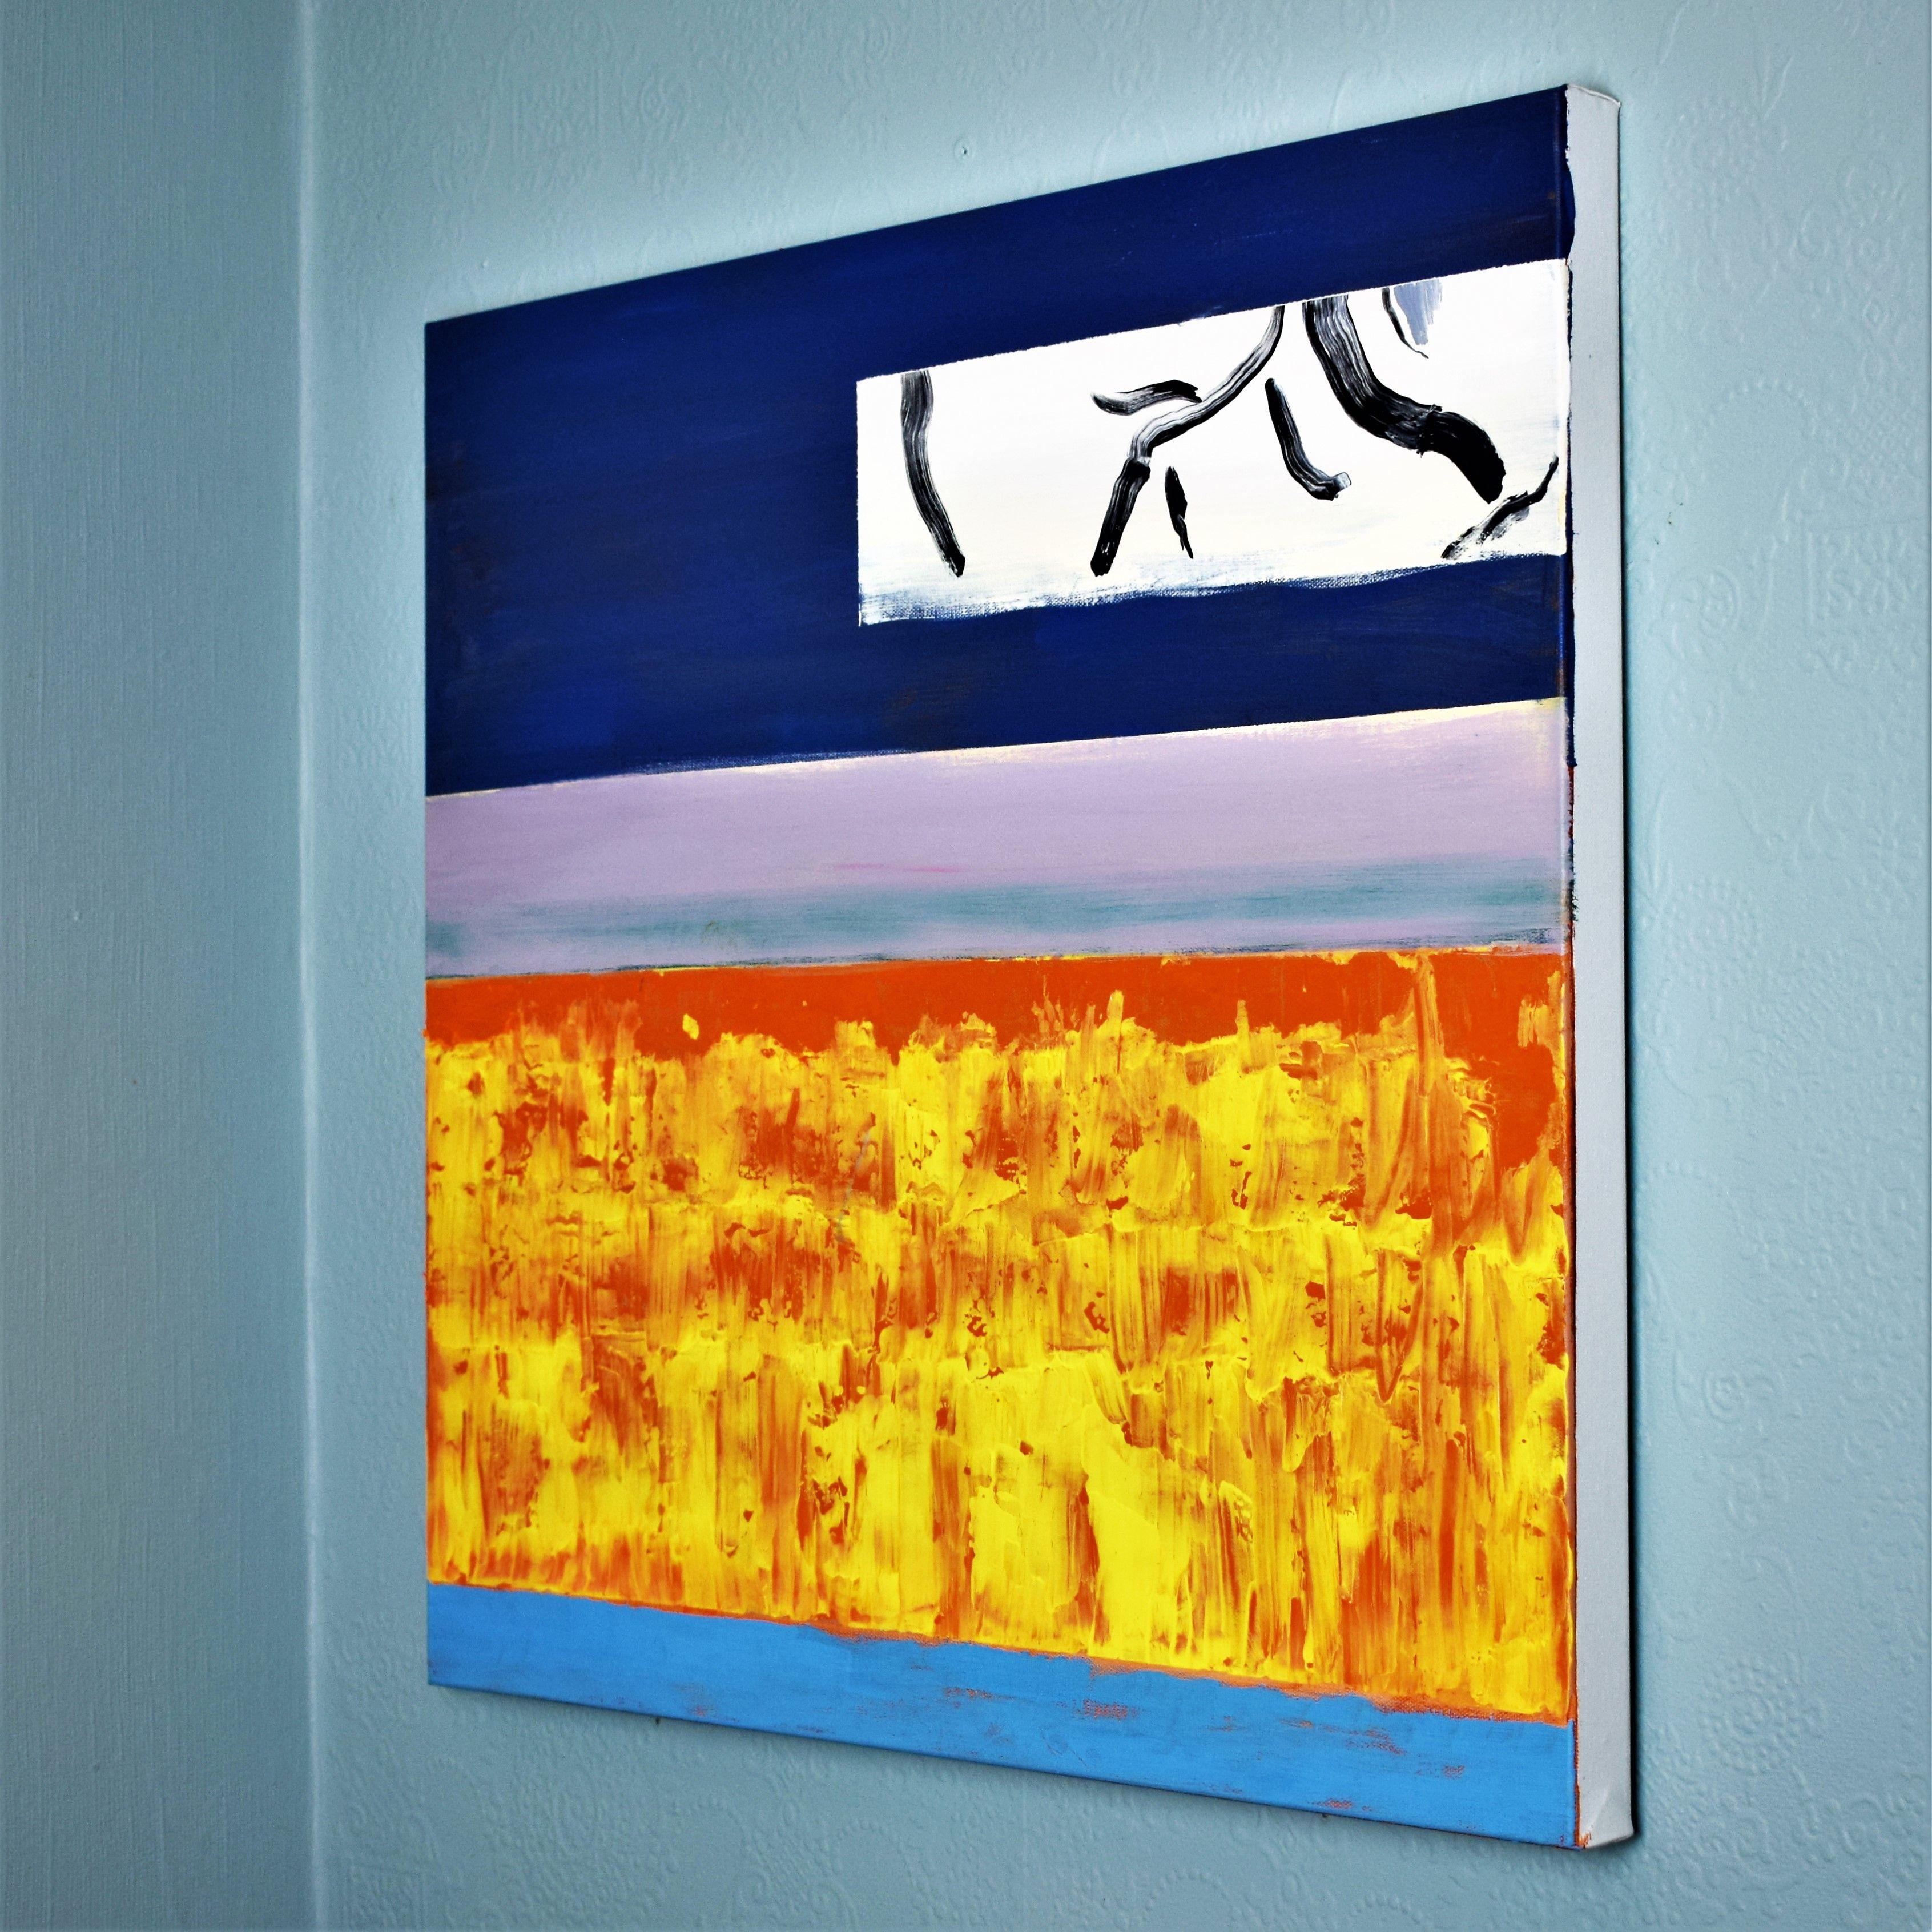 This richly coloured and bold abstract painting will make a distinctive centerpiece for your home.   The composition has a backdrop of horizontal stripes, these are evocative of landscapes with horizon lines, fields, clouds and shorelines.   The